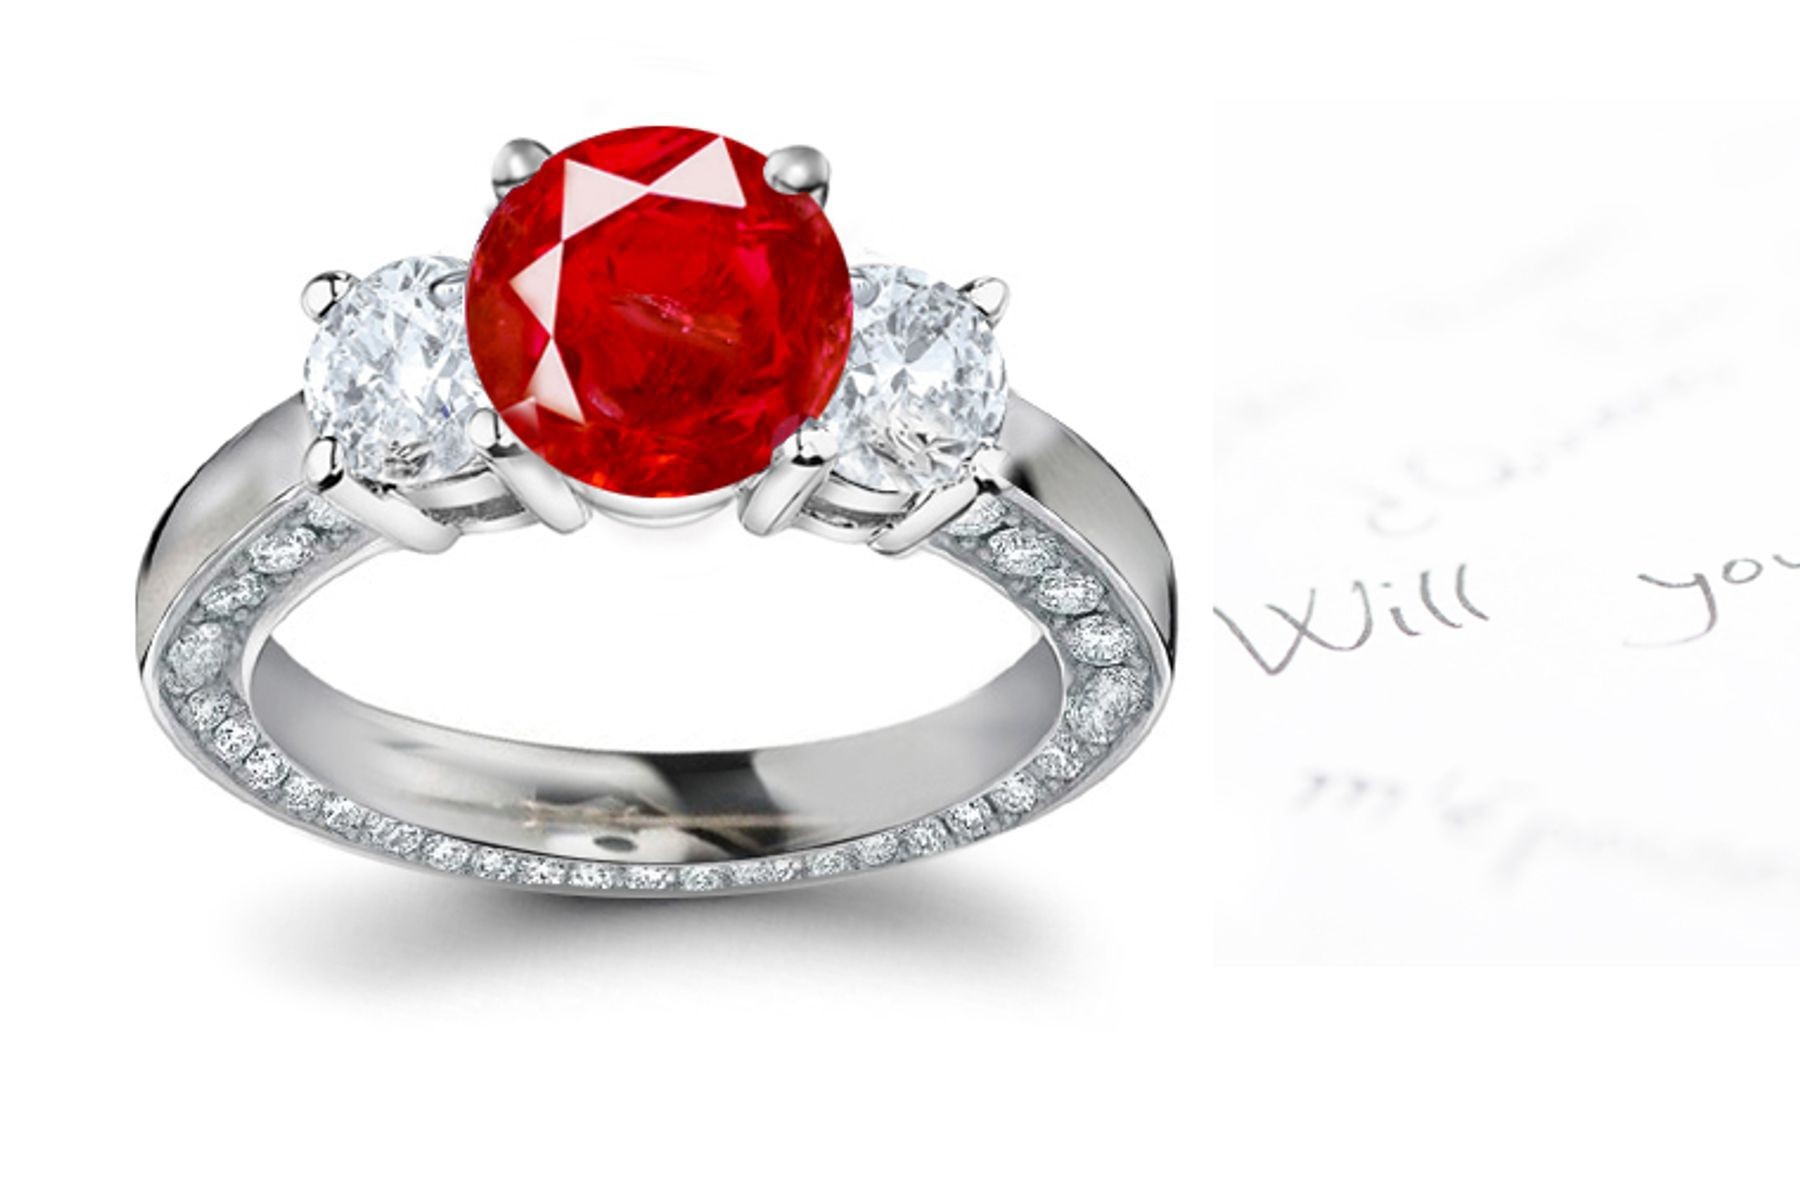 Exclusive Designs: Sensational Three Stone Round Ruby & French Cut Diamond Ring in White Diamond Sparkles Inserted Part of Gold Body Side